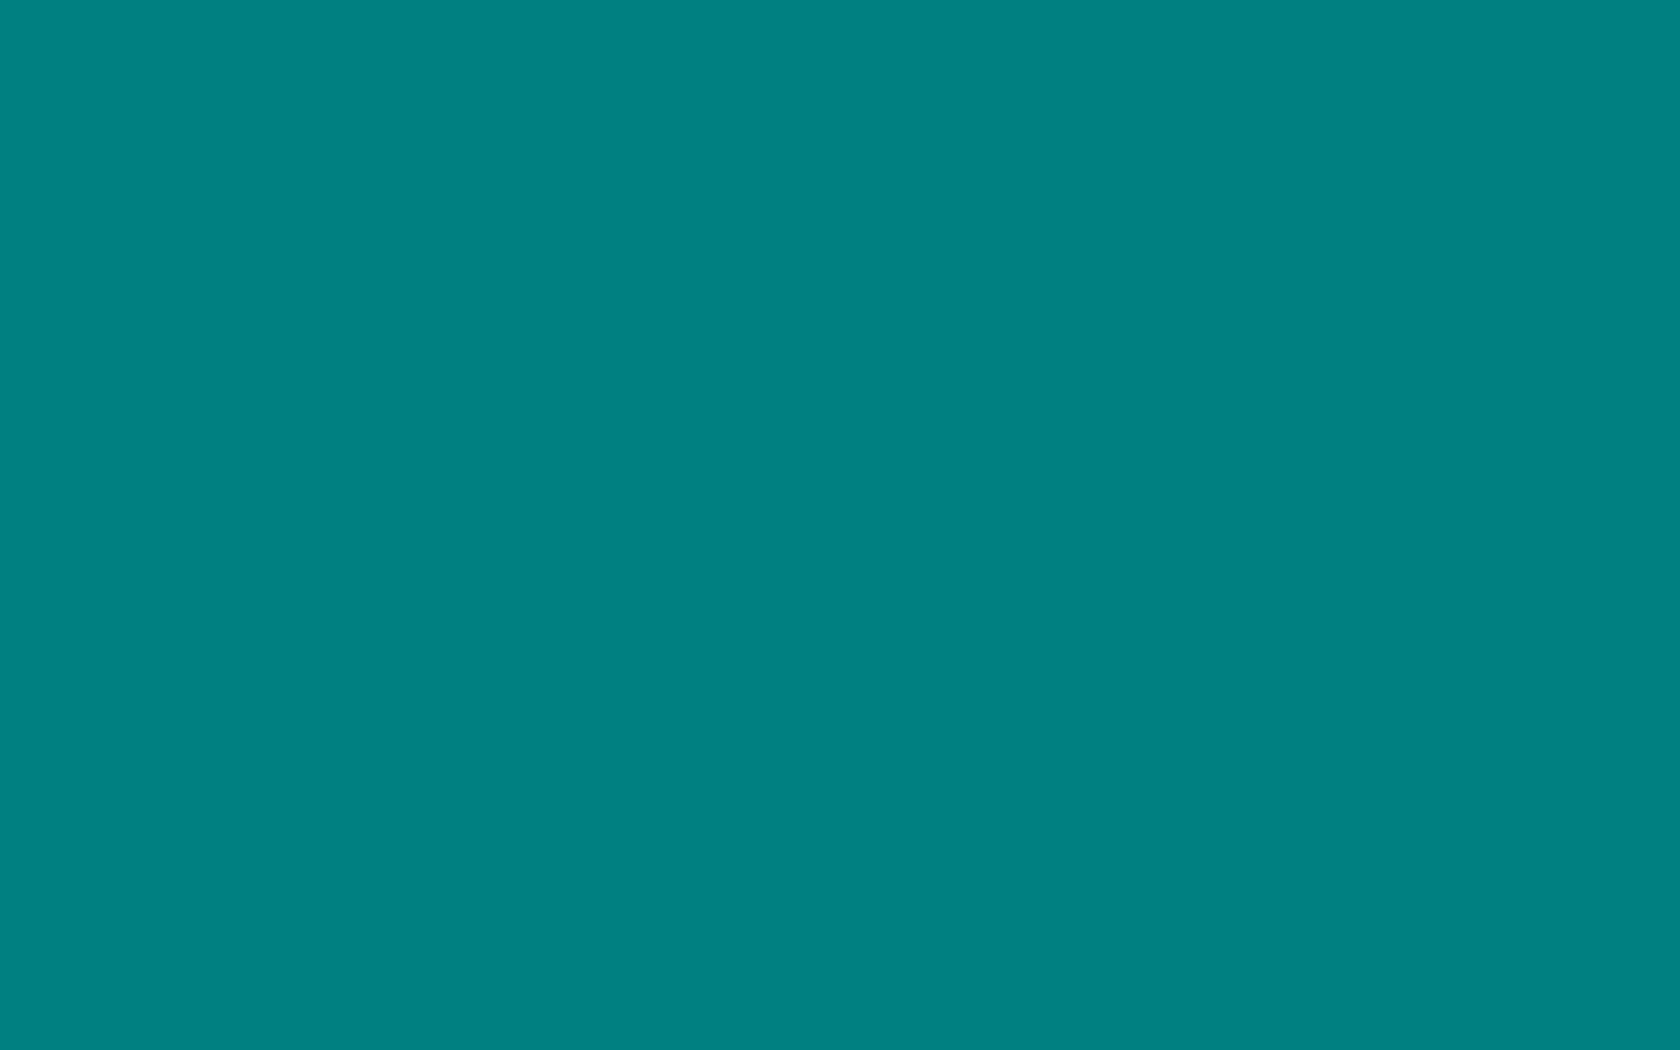 1680x1050 Teal Solid Color Background